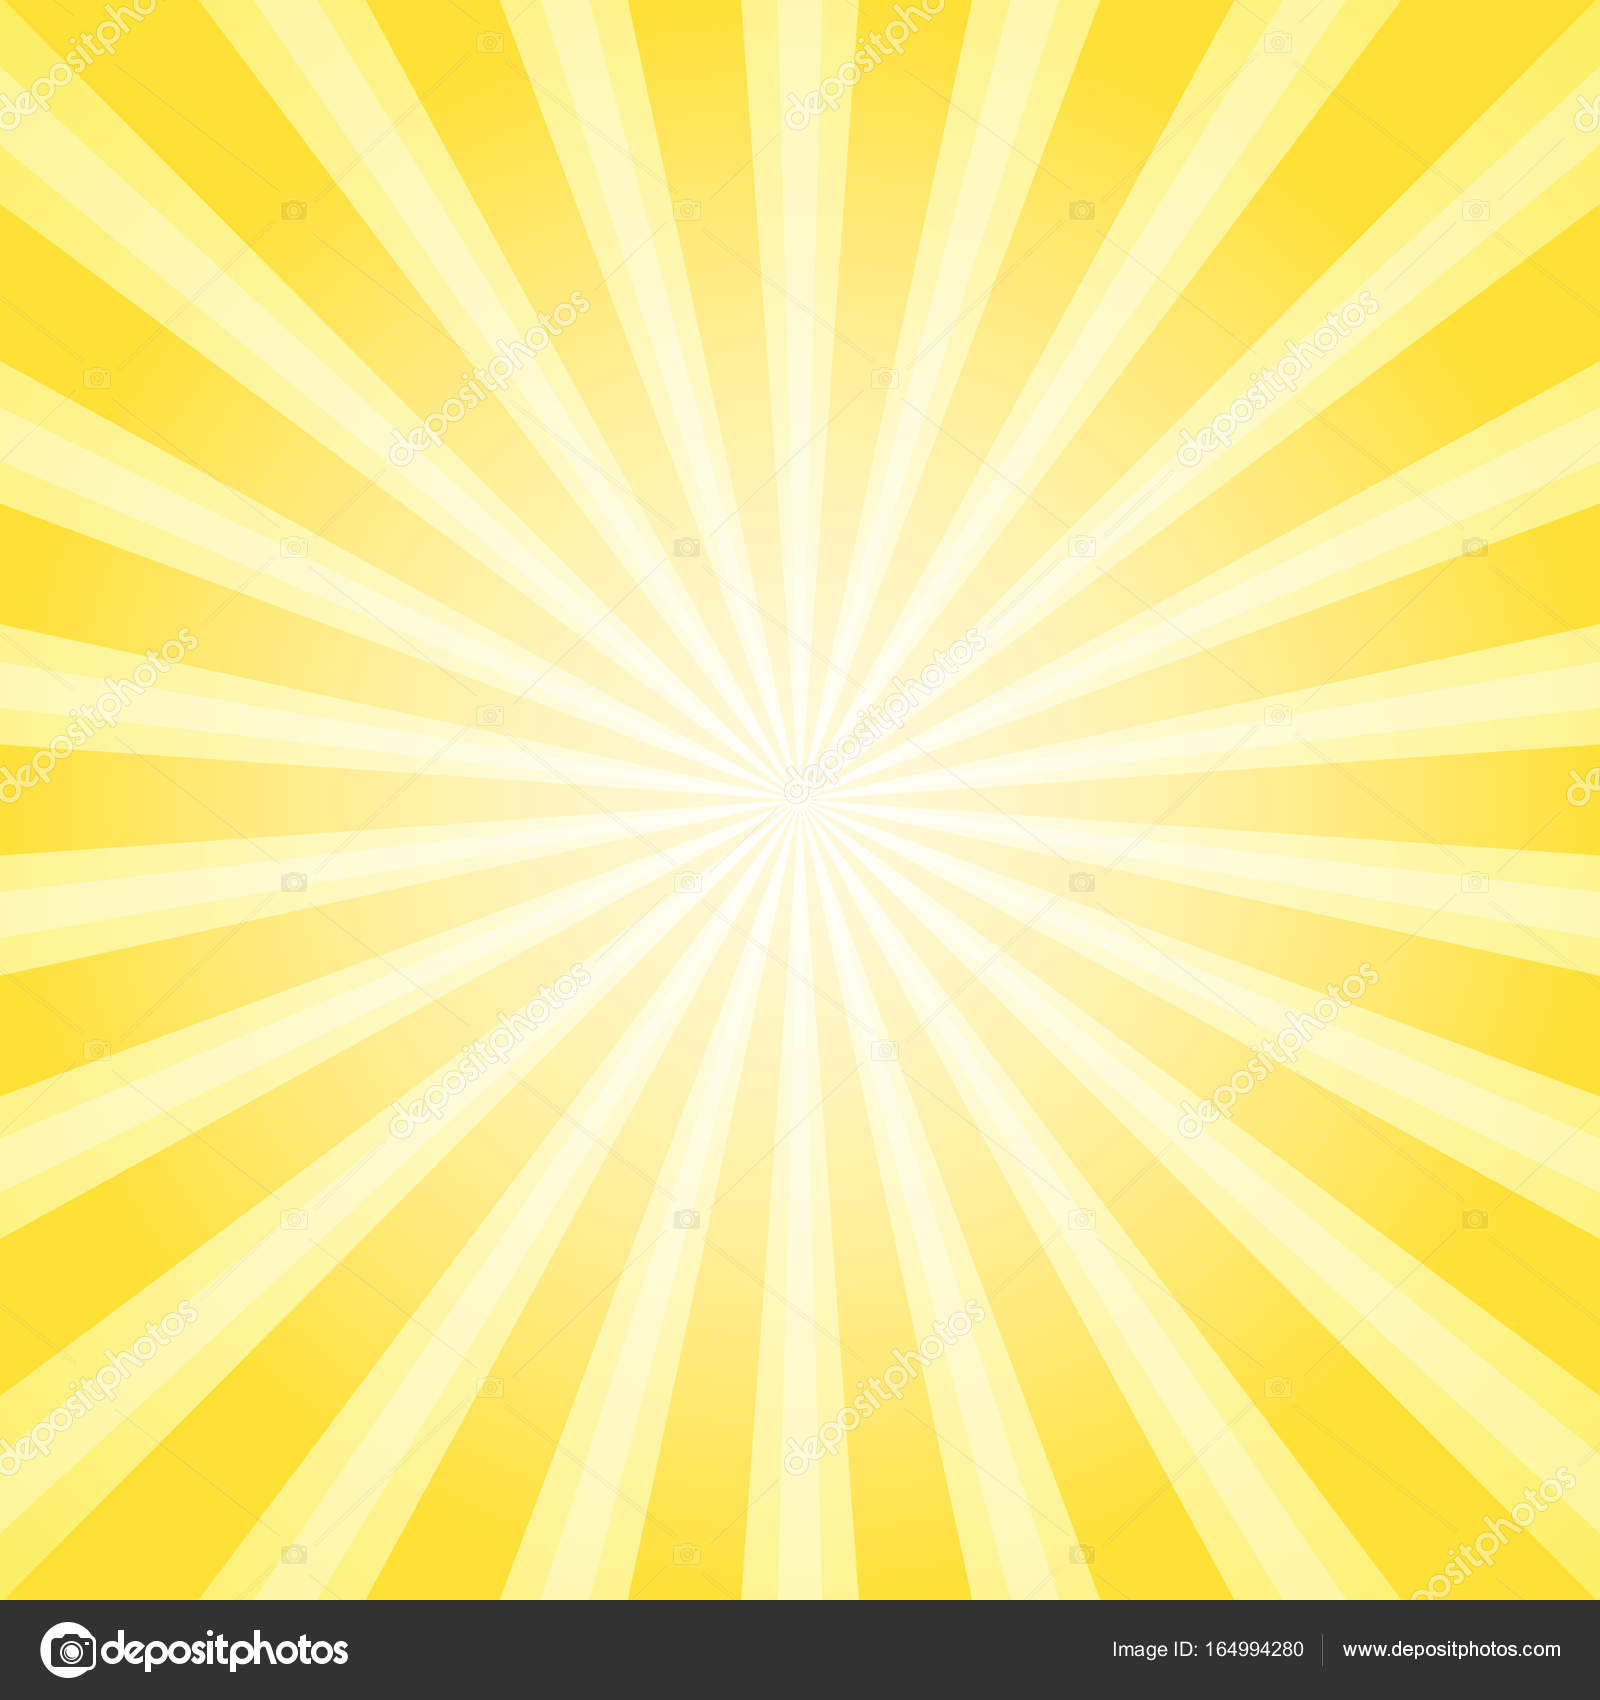 Sunlight abstract background. Powder yellow color burst background ...